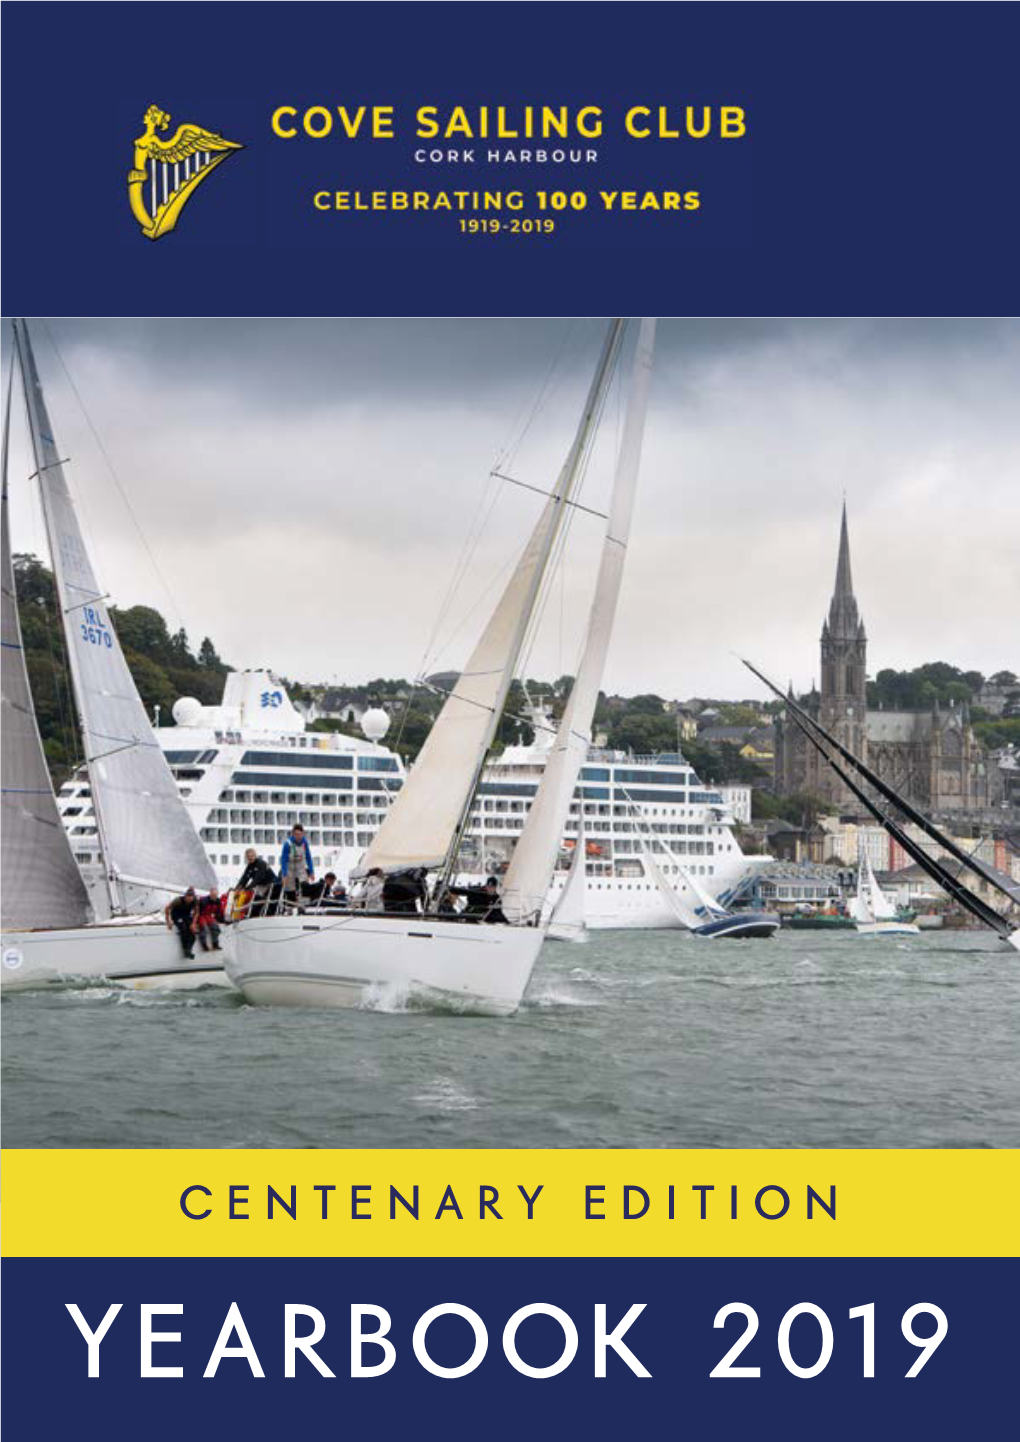 YEARBOOK 2019 It’S a Great Achievement That Cove Sailing Club Are Celebrating Our Centenary Anniversary in 2019, Writes Kieran Dorgan, Commodore of Cove Sailing Club